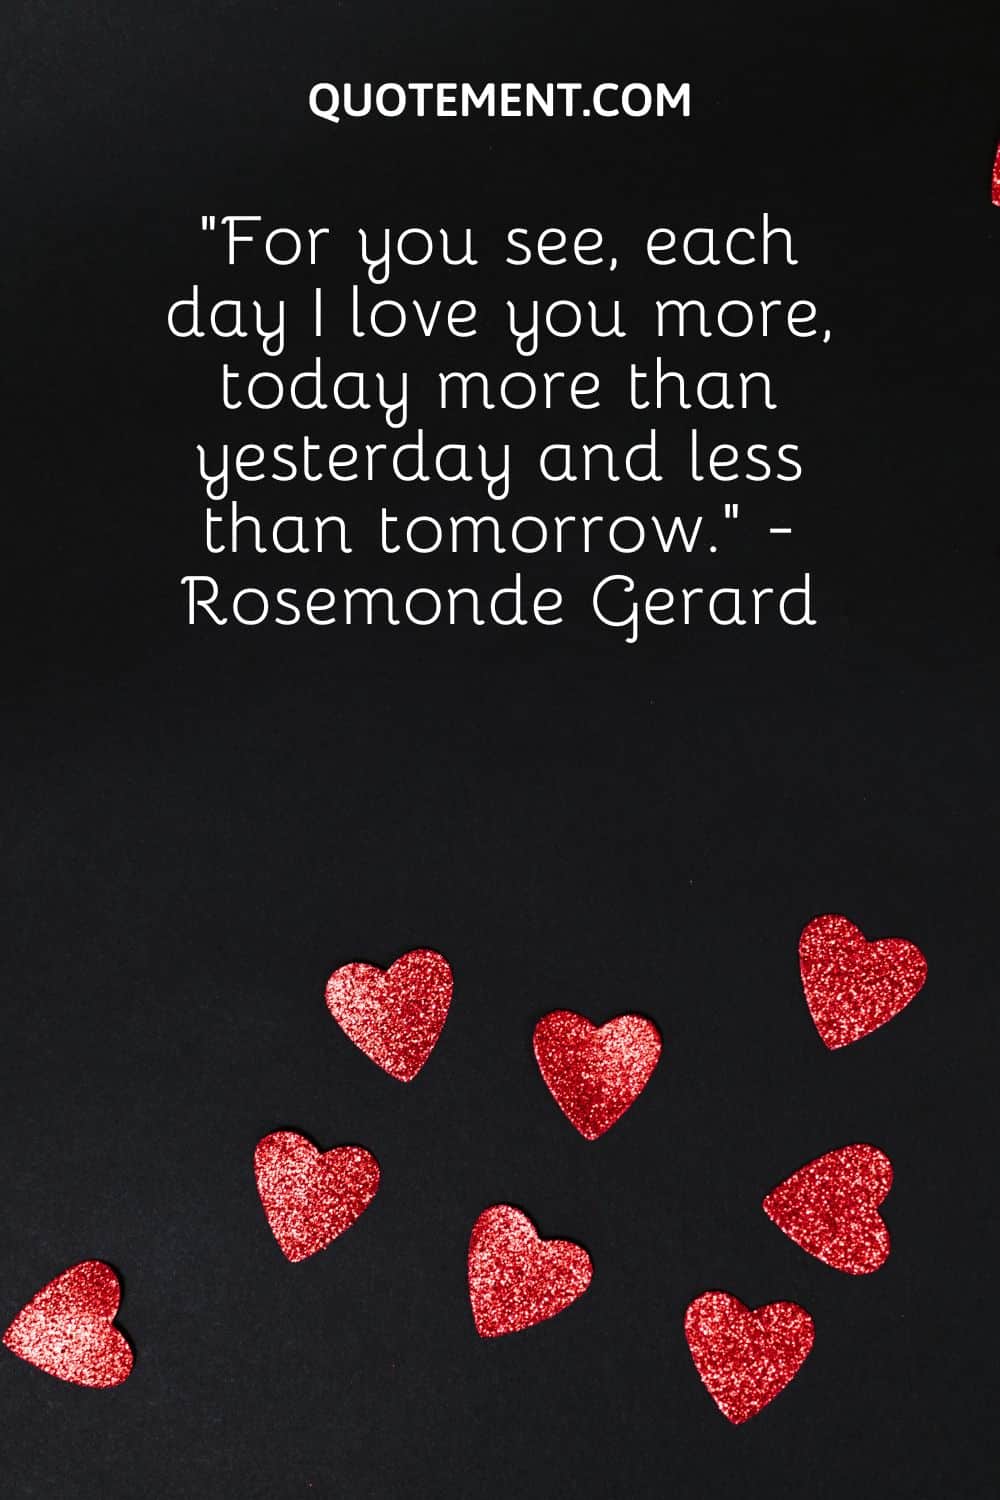 “For you see, each day I love you more, today more than yesterday and less than tomorrow.” - Rosemonde Gerard